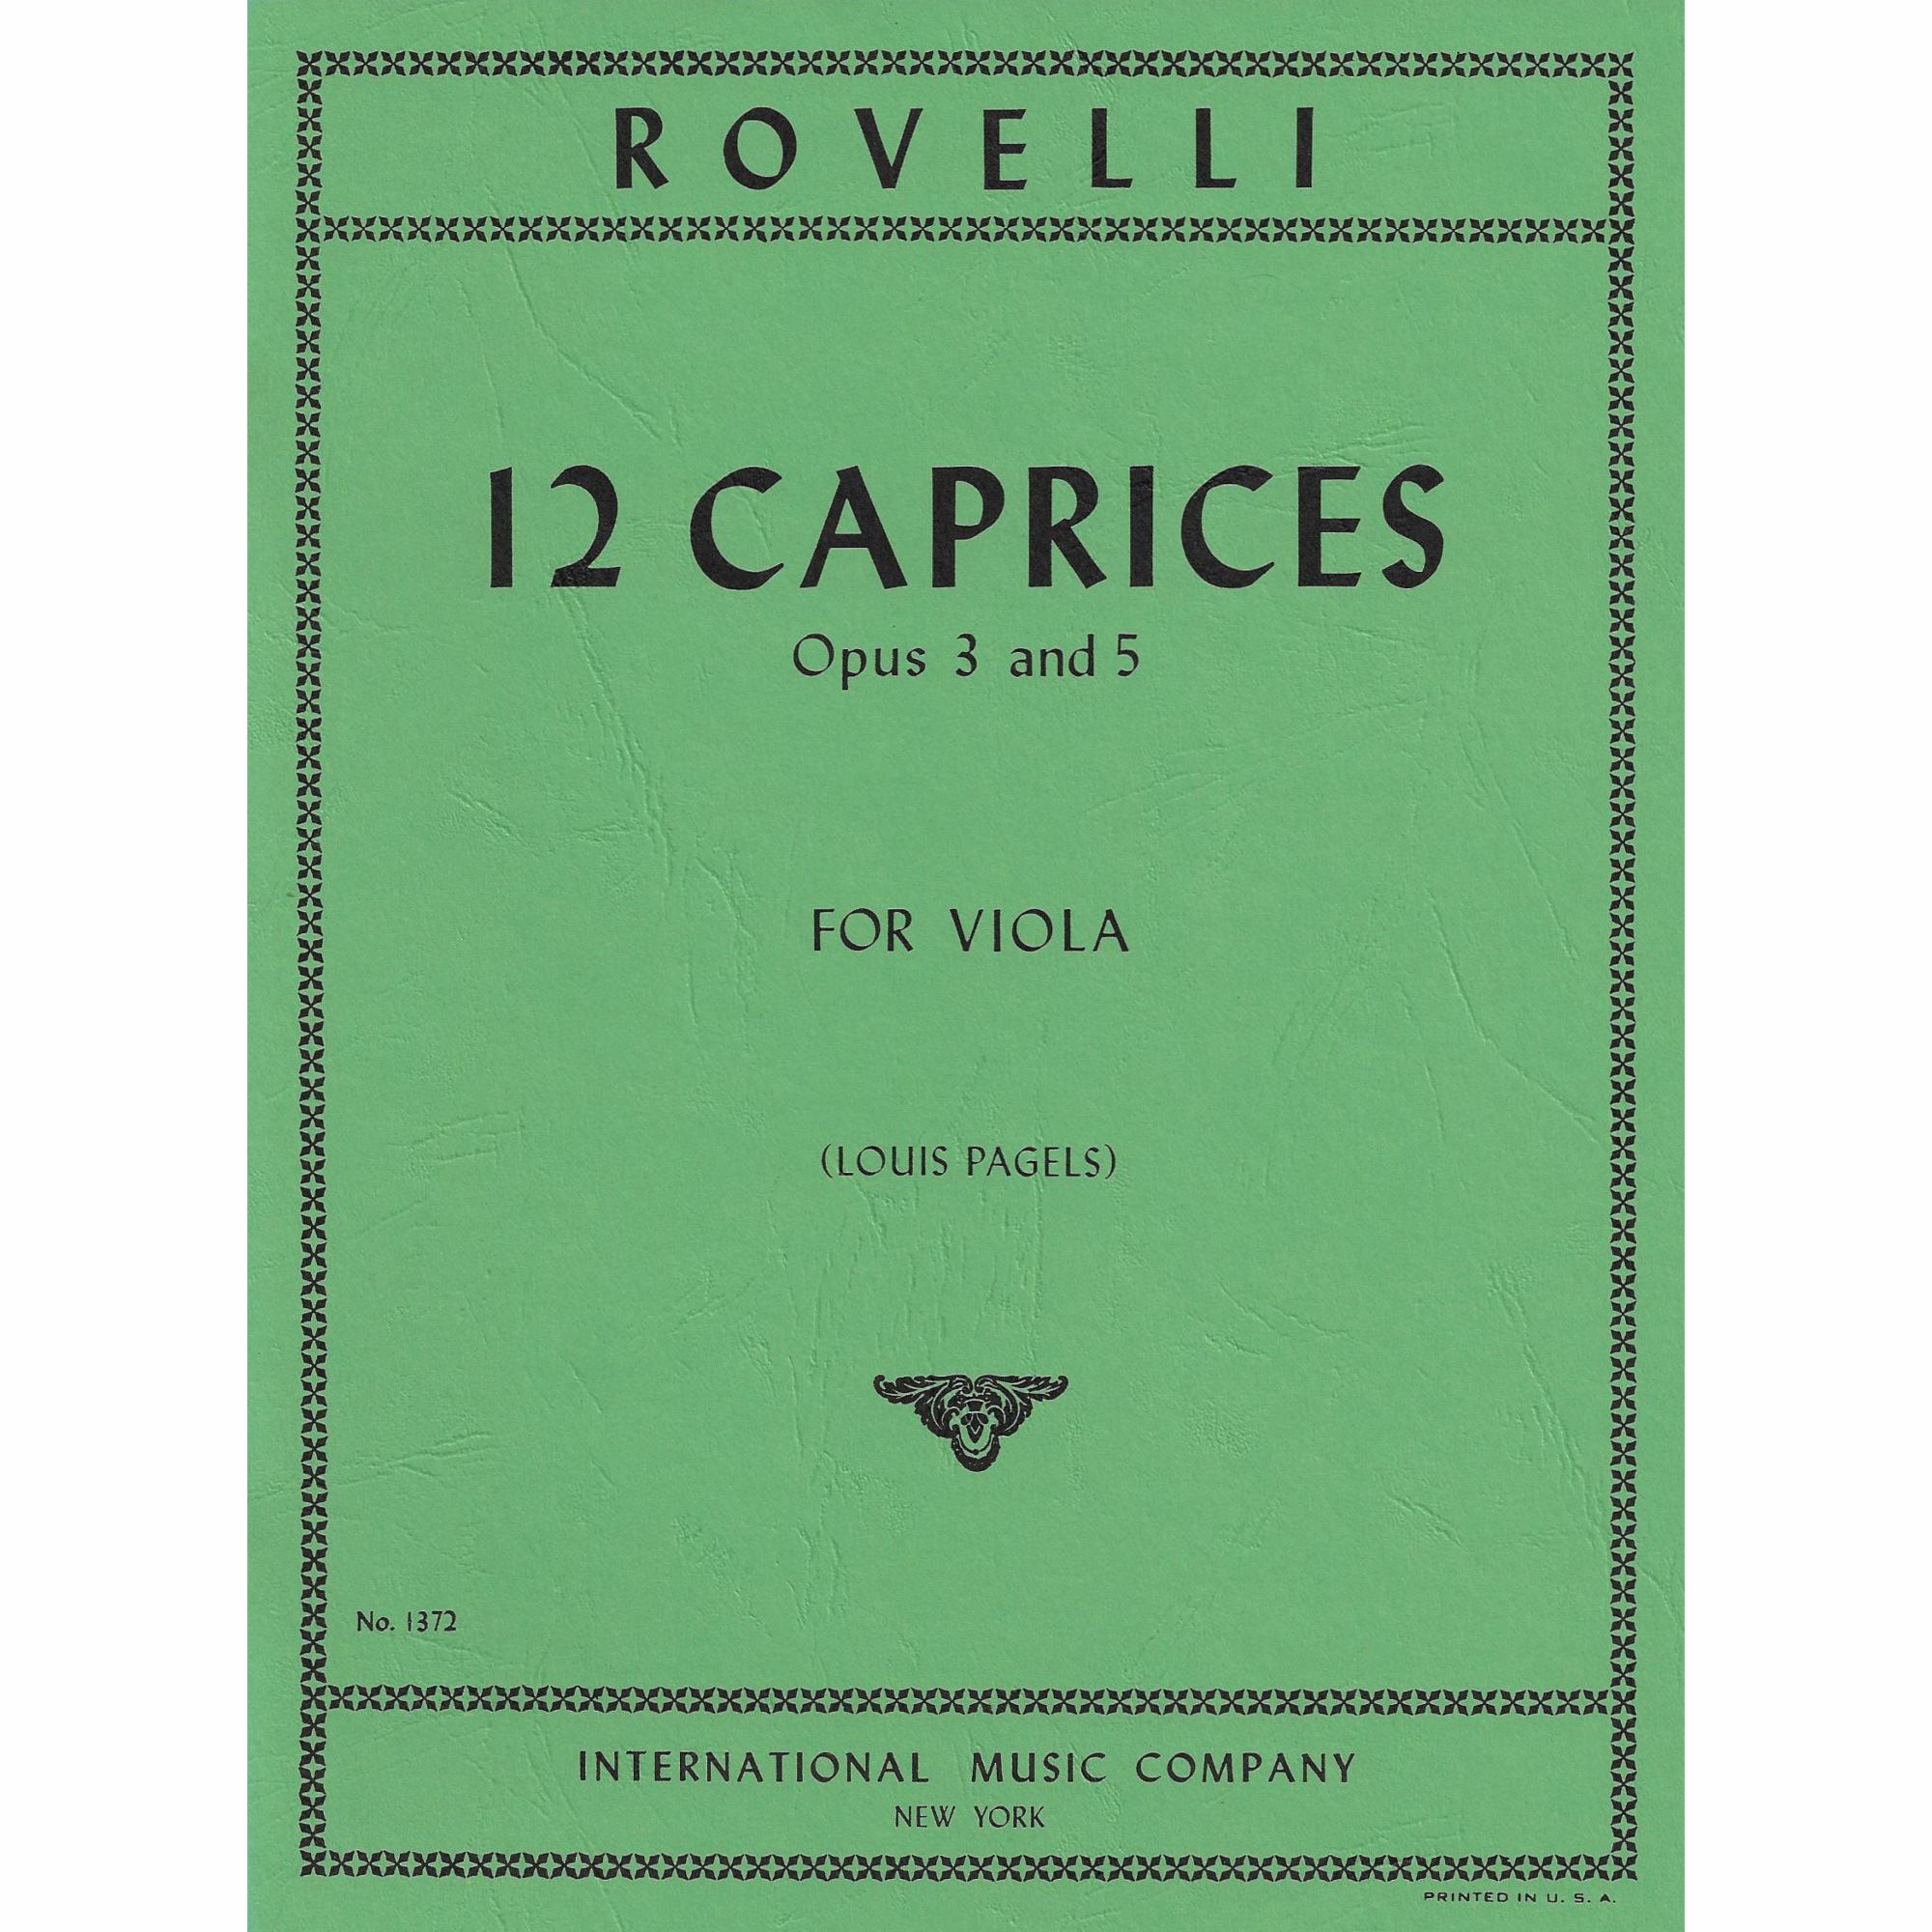 Rovelli -- 12 Caprices, Op. 3 & 5 for Viola